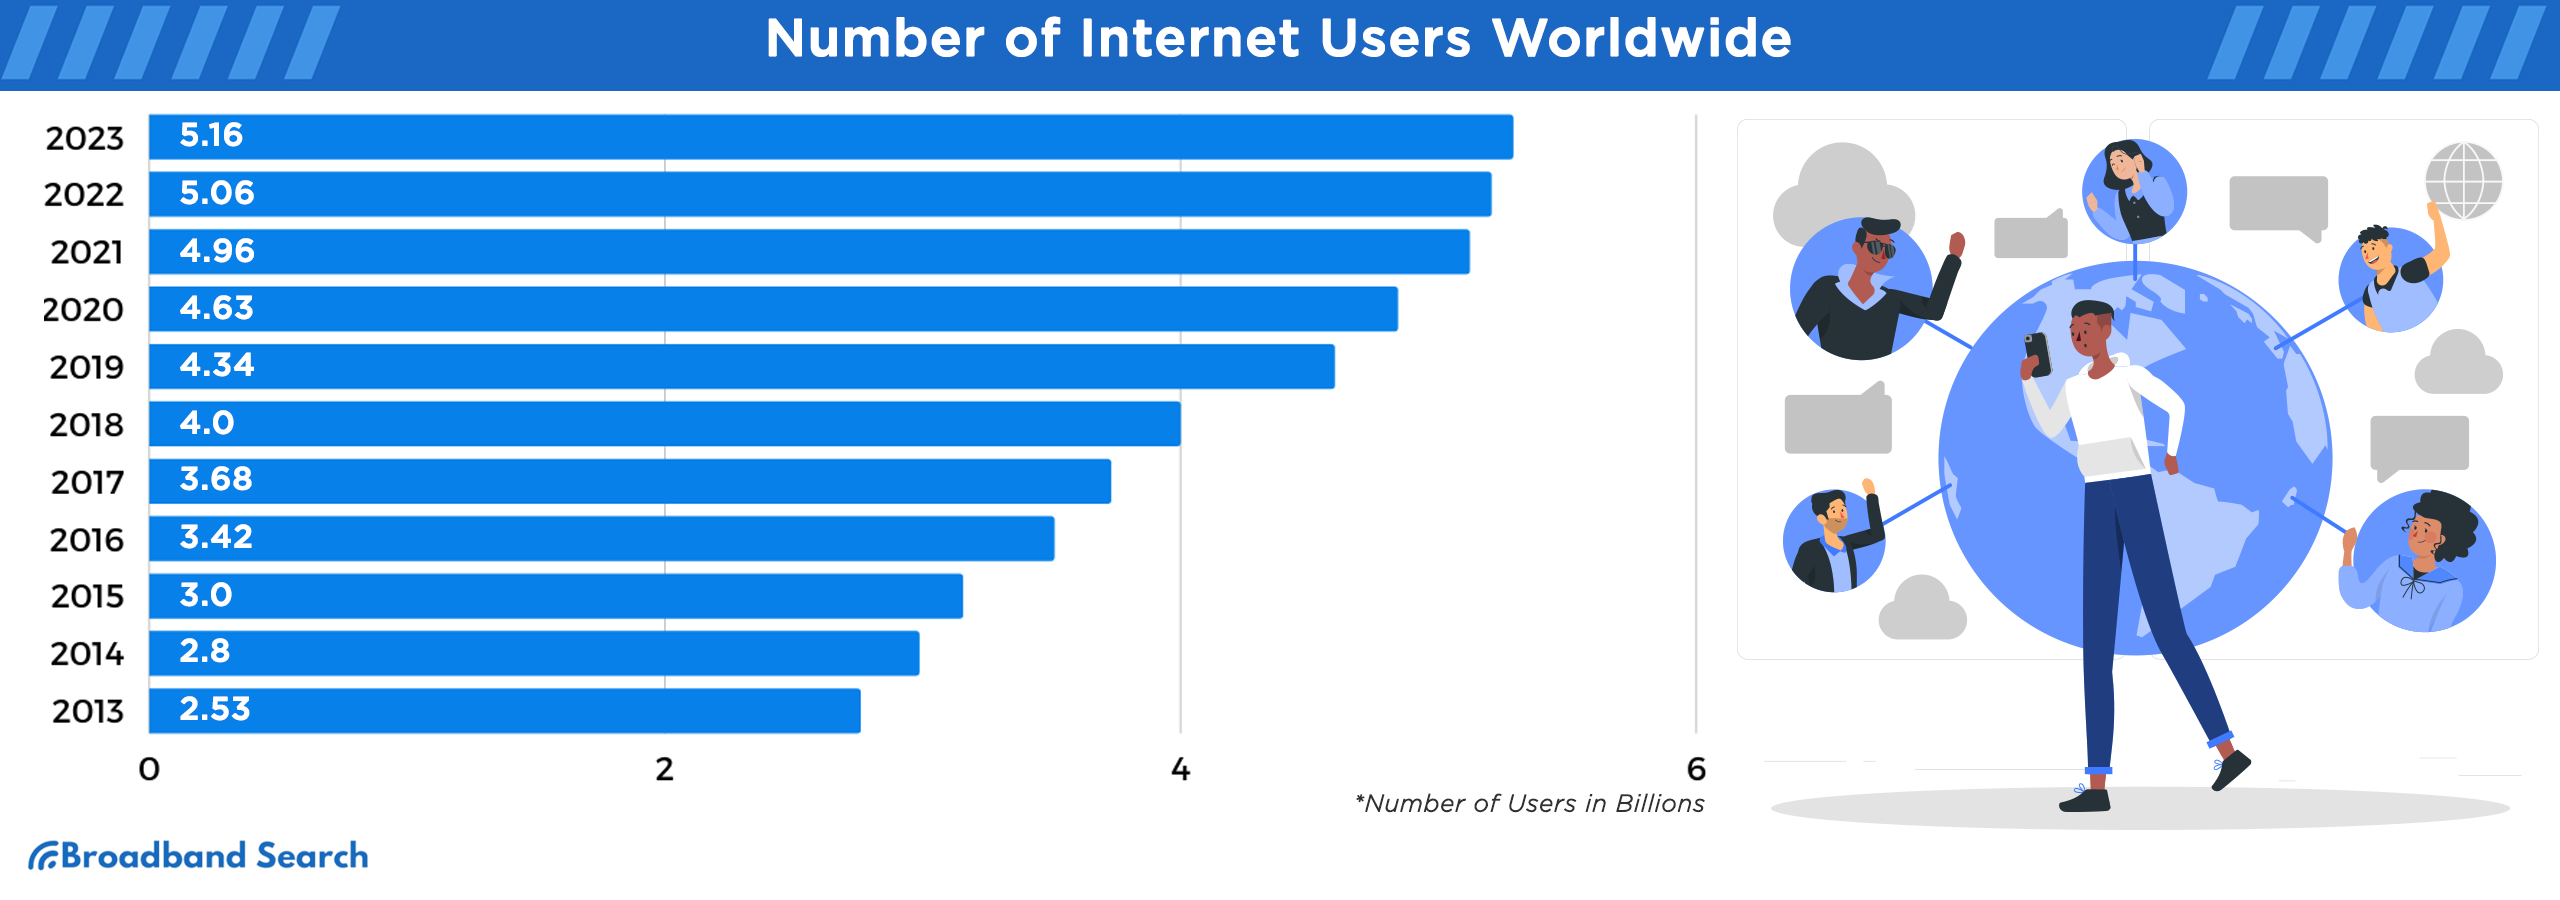 Number of Internet users worldwide